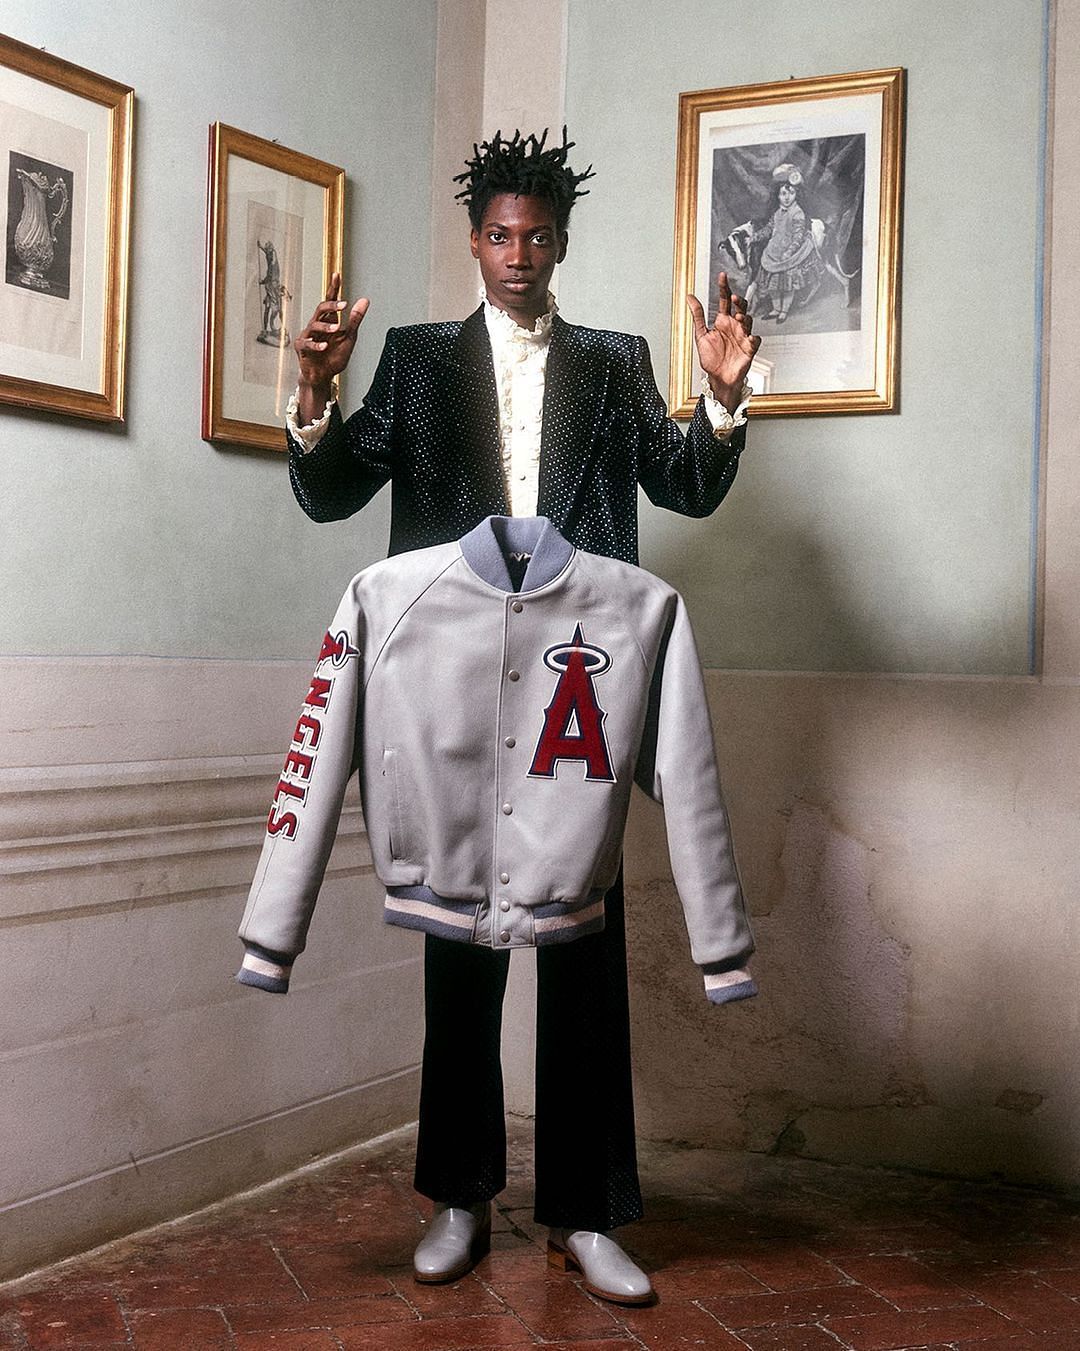 Gucci x MLB collection released on 22nd April 2022.